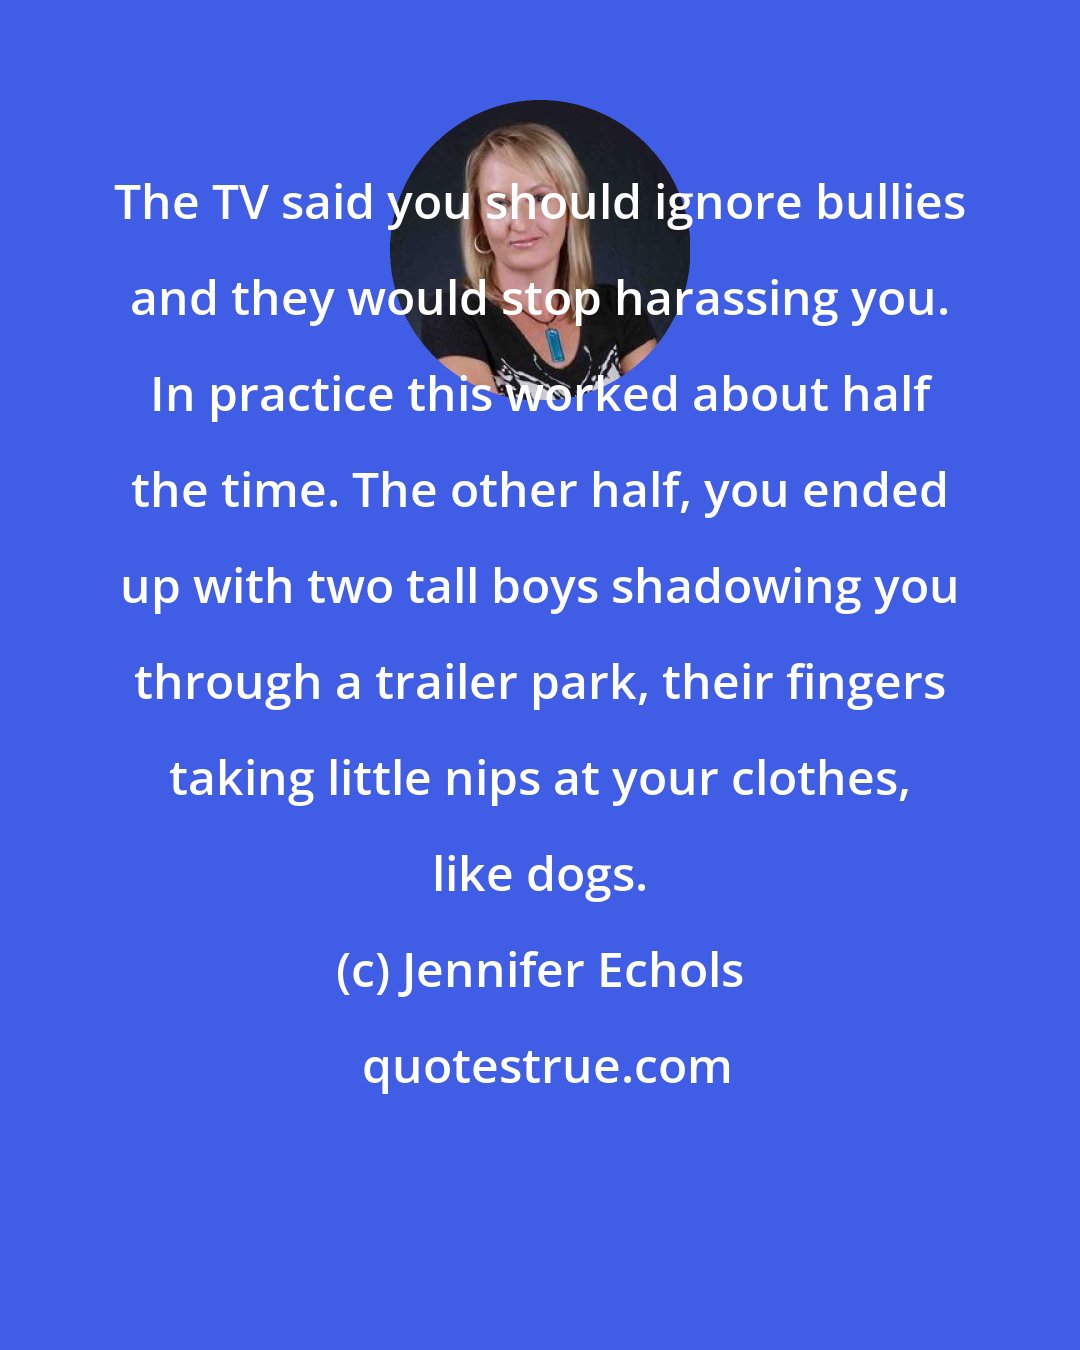 Jennifer Echols: The TV said you should ignore bullies and they would stop harassing you. In practice this worked about half the time. The other half, you ended up with two tall boys shadowing you through a trailer park, their fingers taking little nips at your clothes, like dogs.